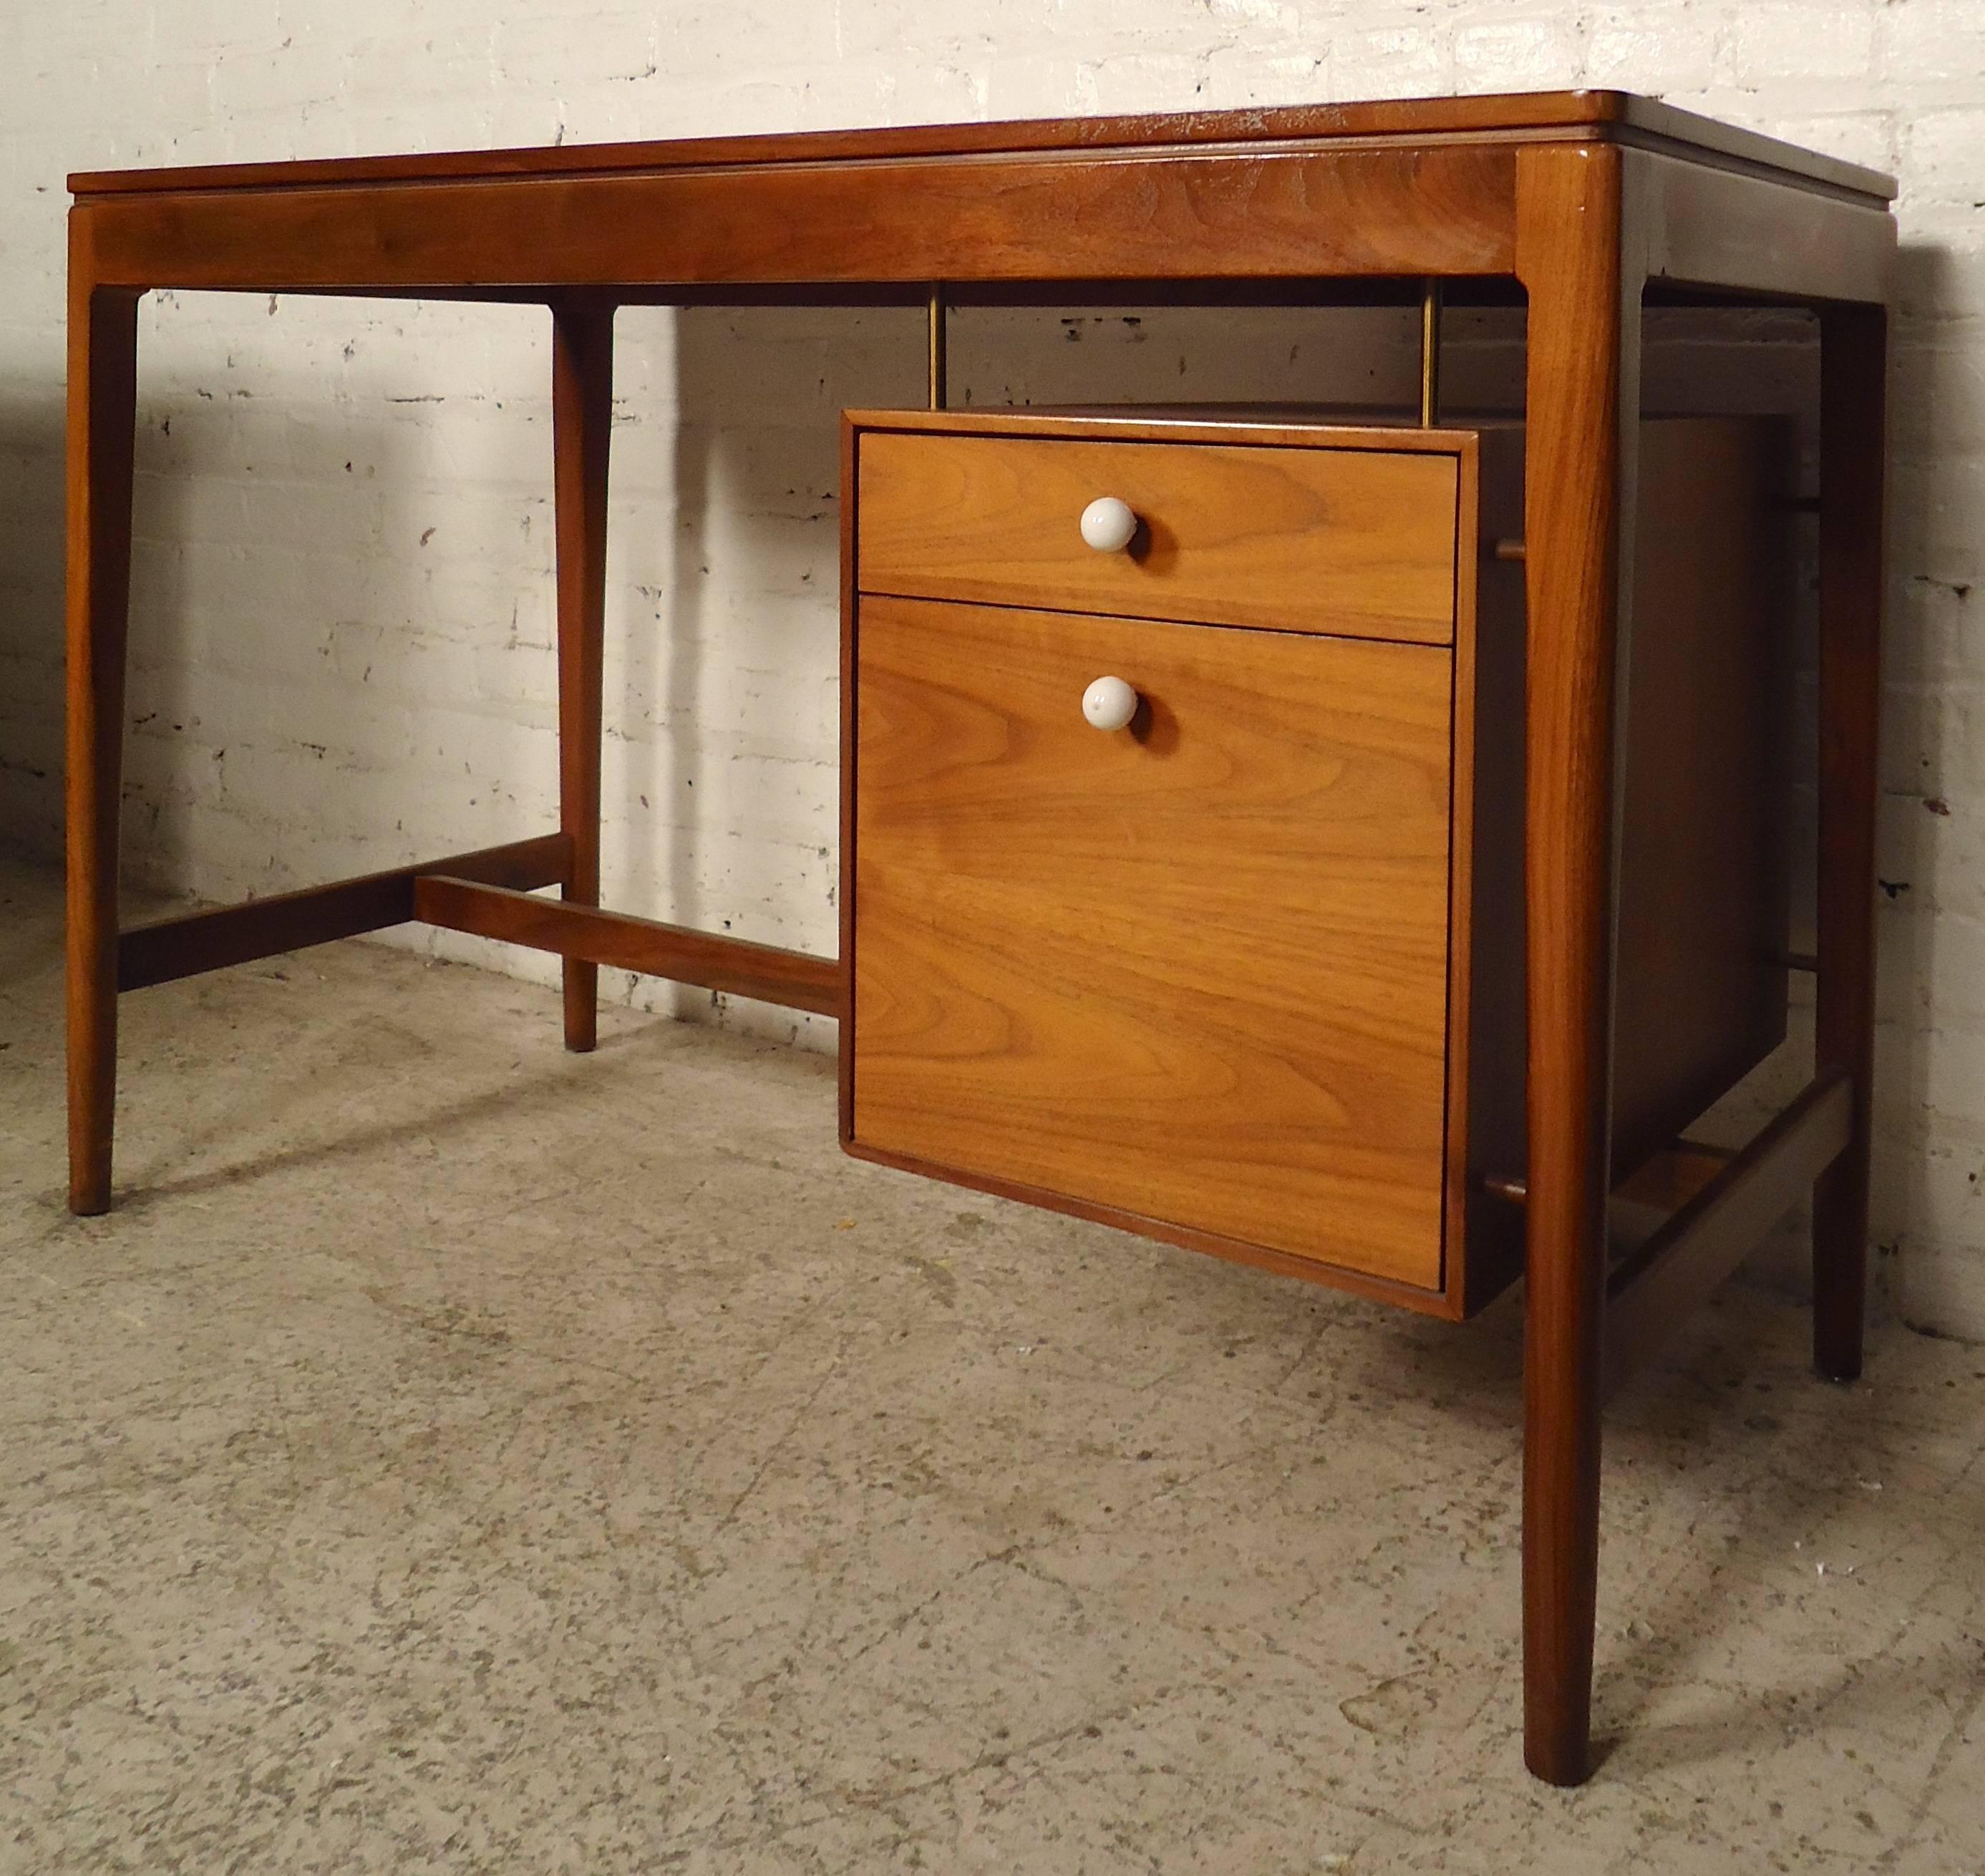 Mid-Century Modern desk by Kipp Stewart for Drexel's Declaration line. Made with warm walnut grain, two floating drawers with glass pulls, finished back and tapered legs.
Measuring kneehole: 26 W x 12 D x 26 H

(Please confirm item location NY or